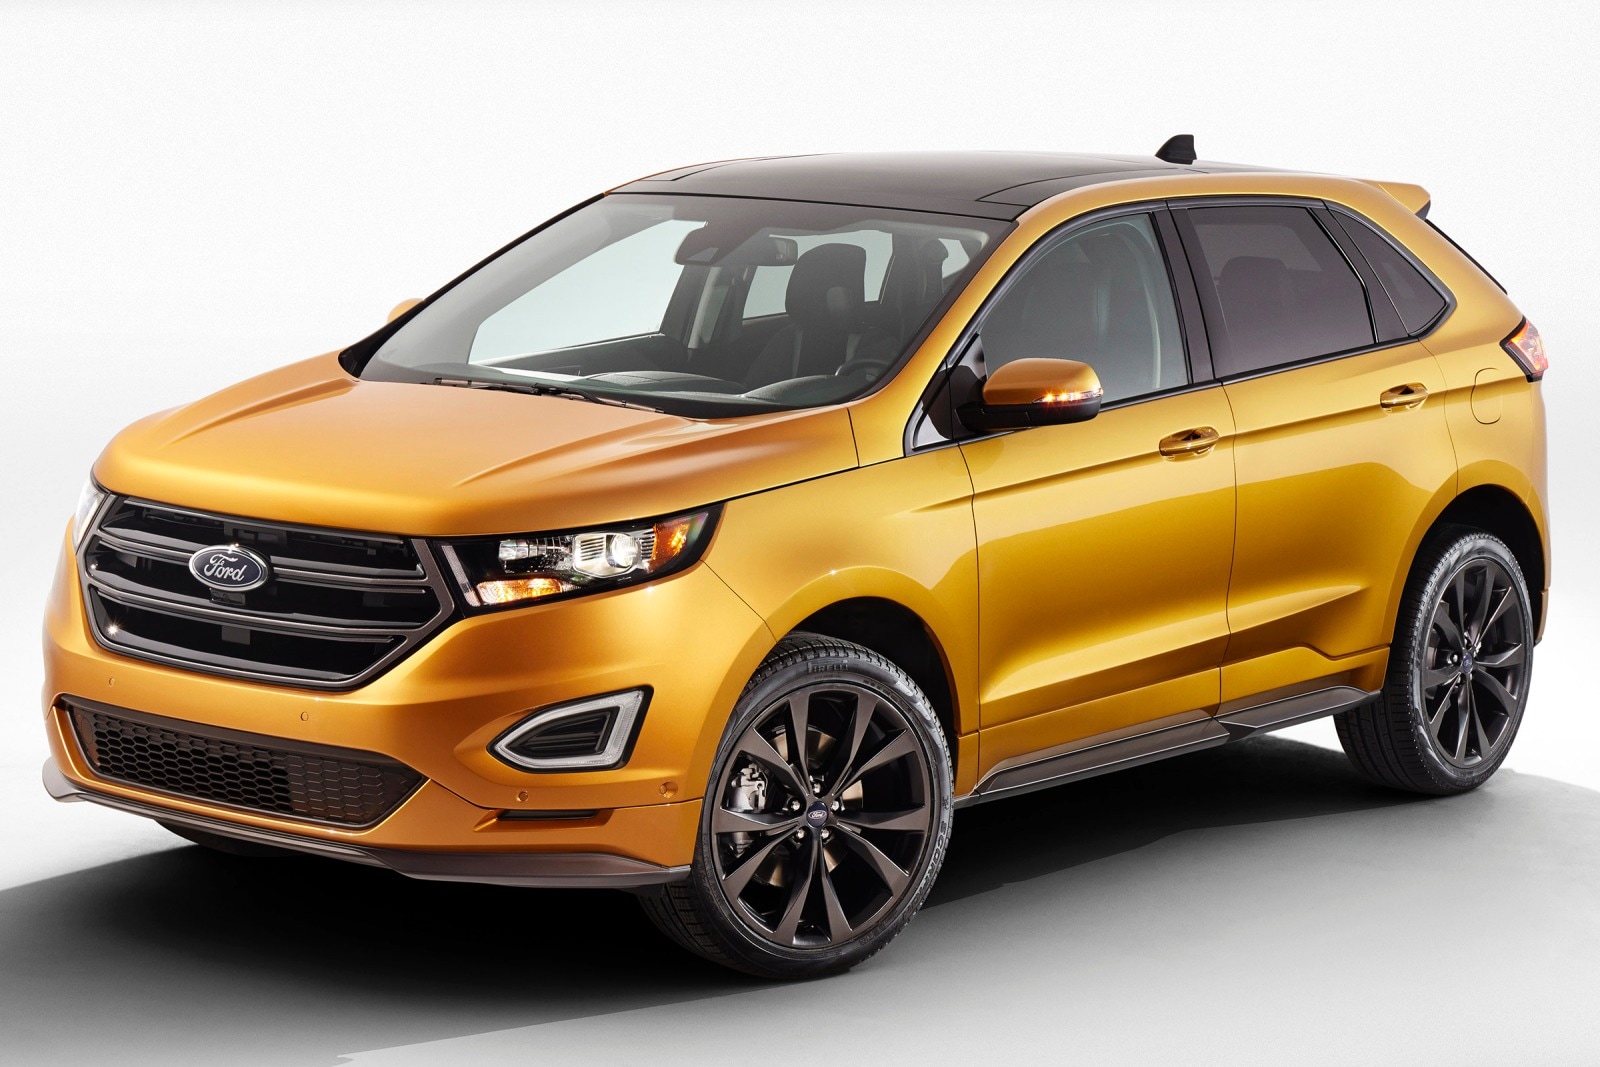 2015 Ford Edge Review & Ratings | Edmunds